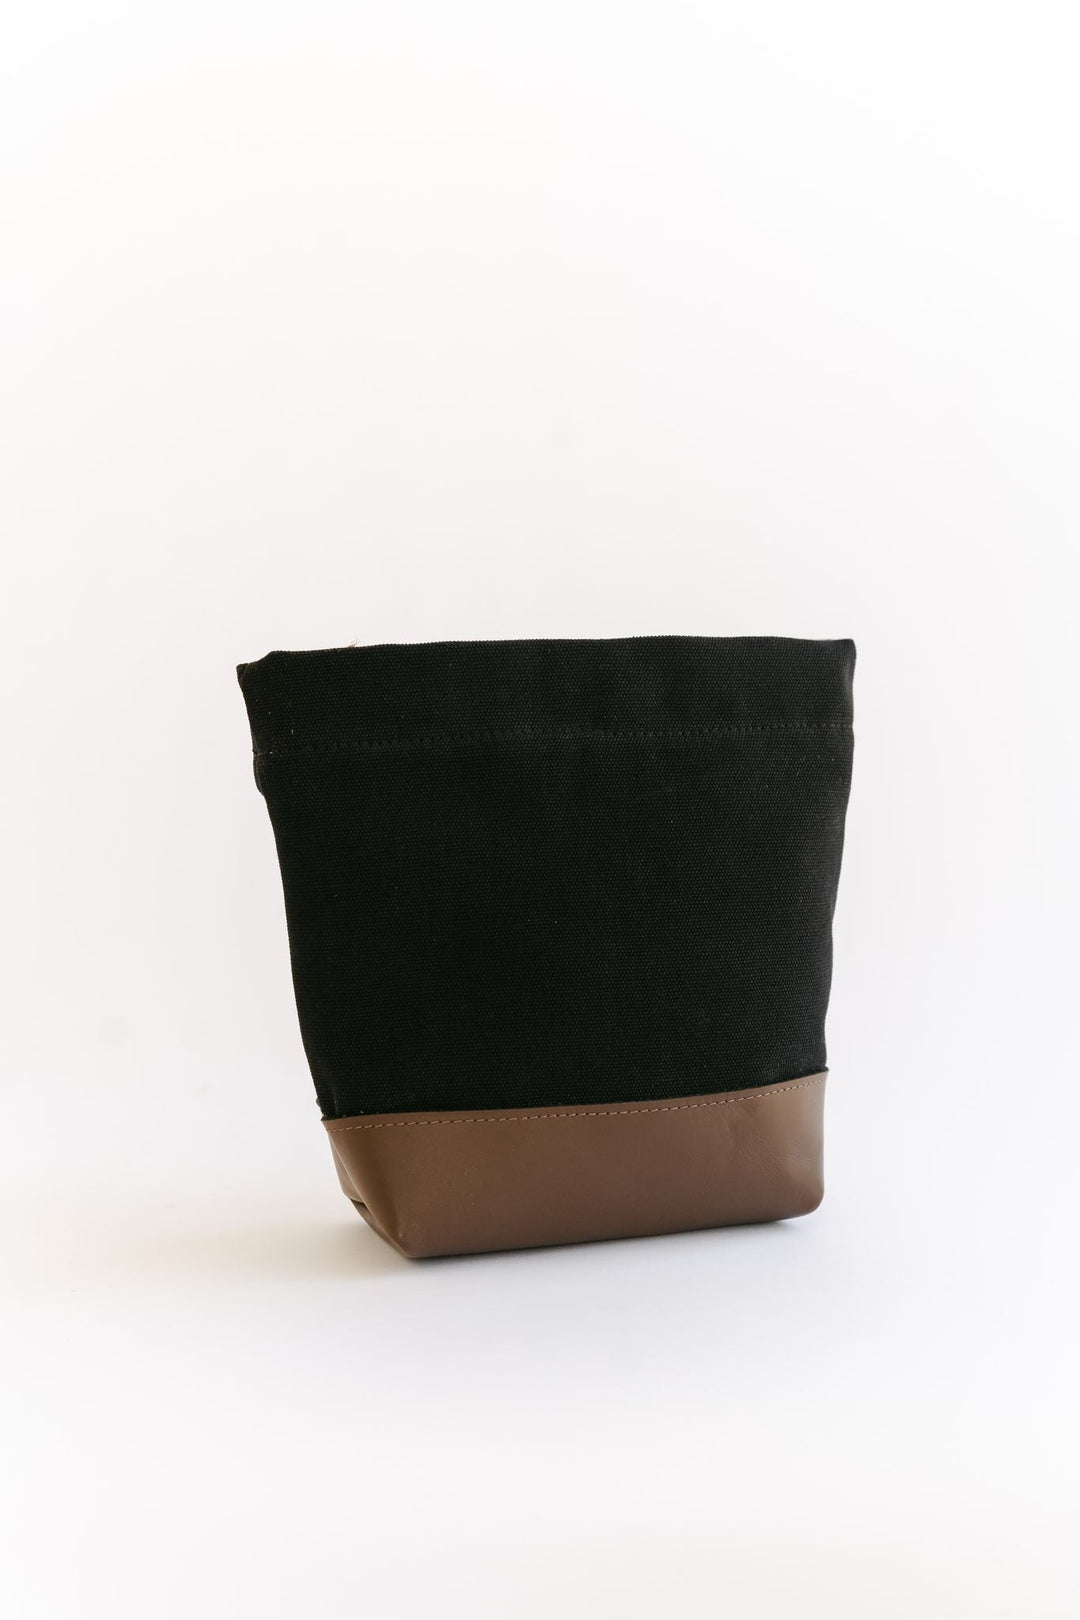 Betsy | Signature Black Canvas + Brown Leather